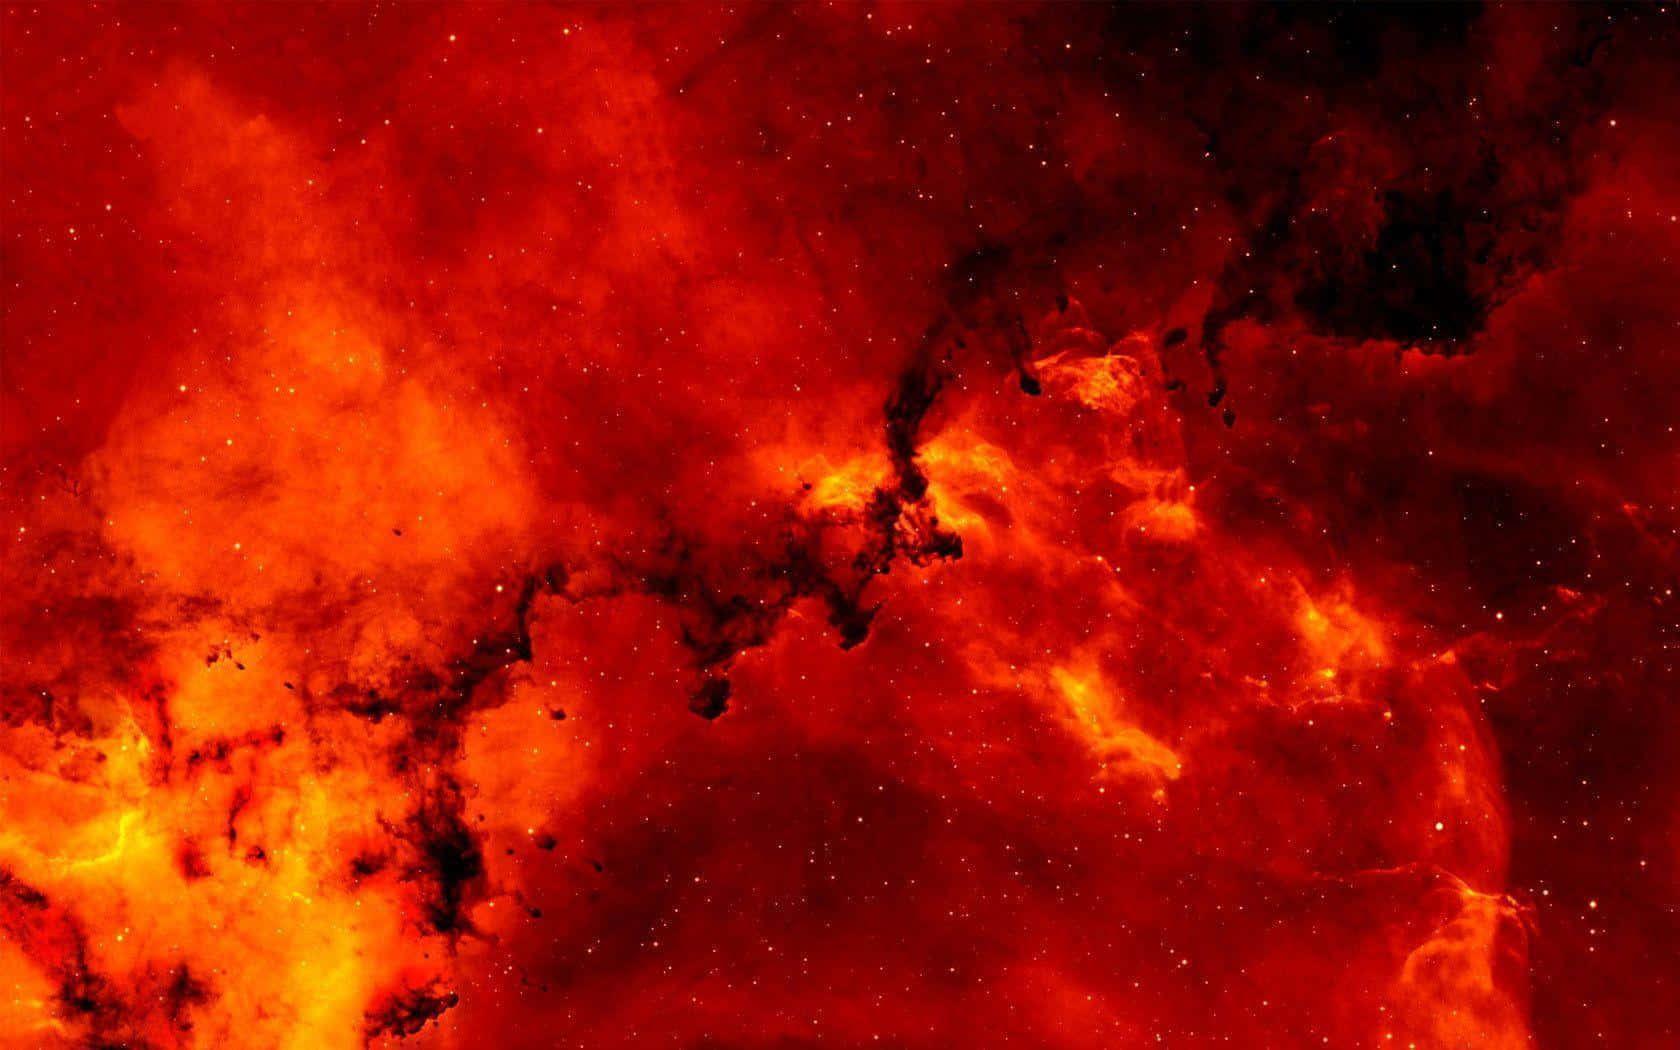 A Red And Orange Nebula In Space